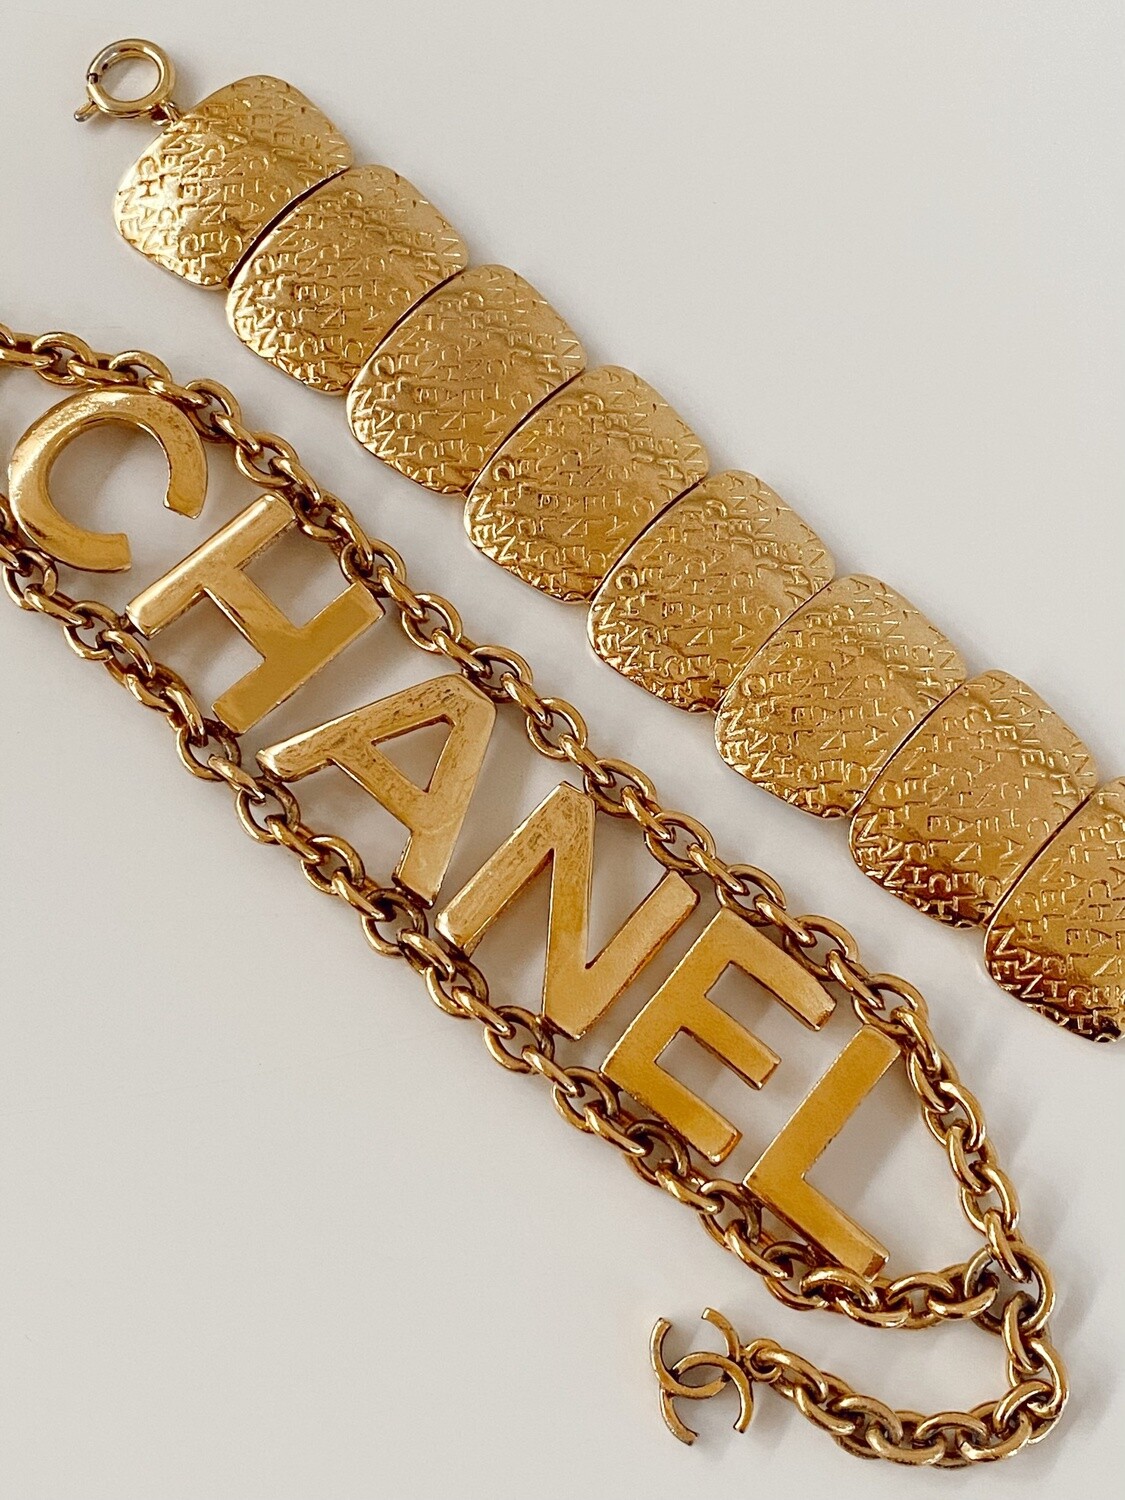 Vintage 90's CHANEL LOGO LETTERS Gold Plated Charm Bracelet Bangle Cuff Jewelry